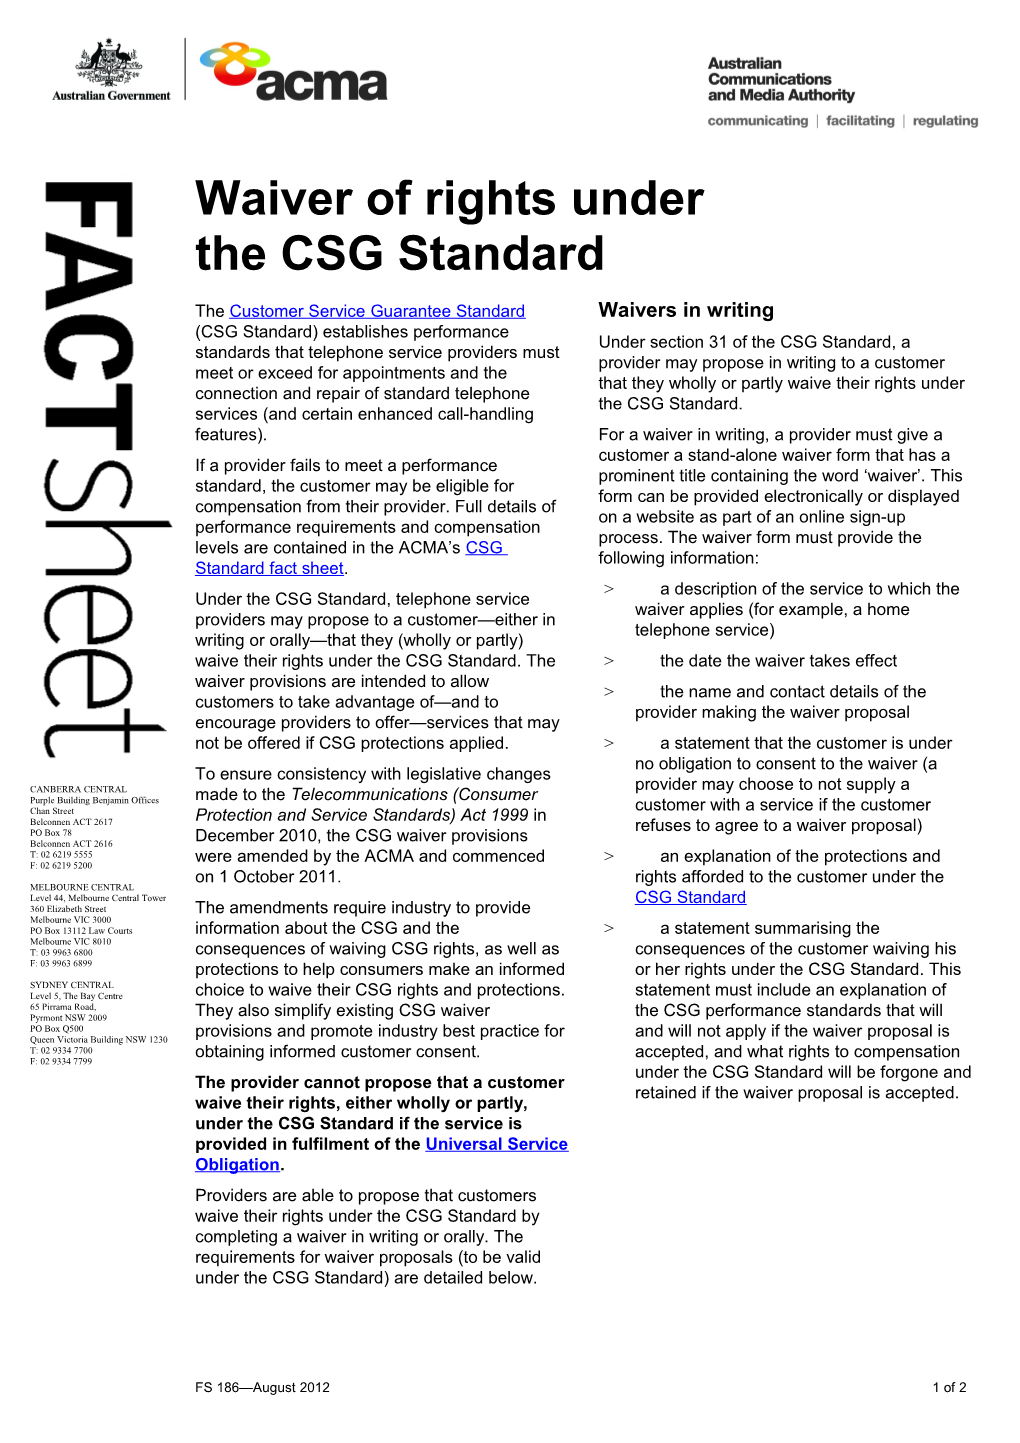 FS186 - Waiver of Rights Under the CSG Standard